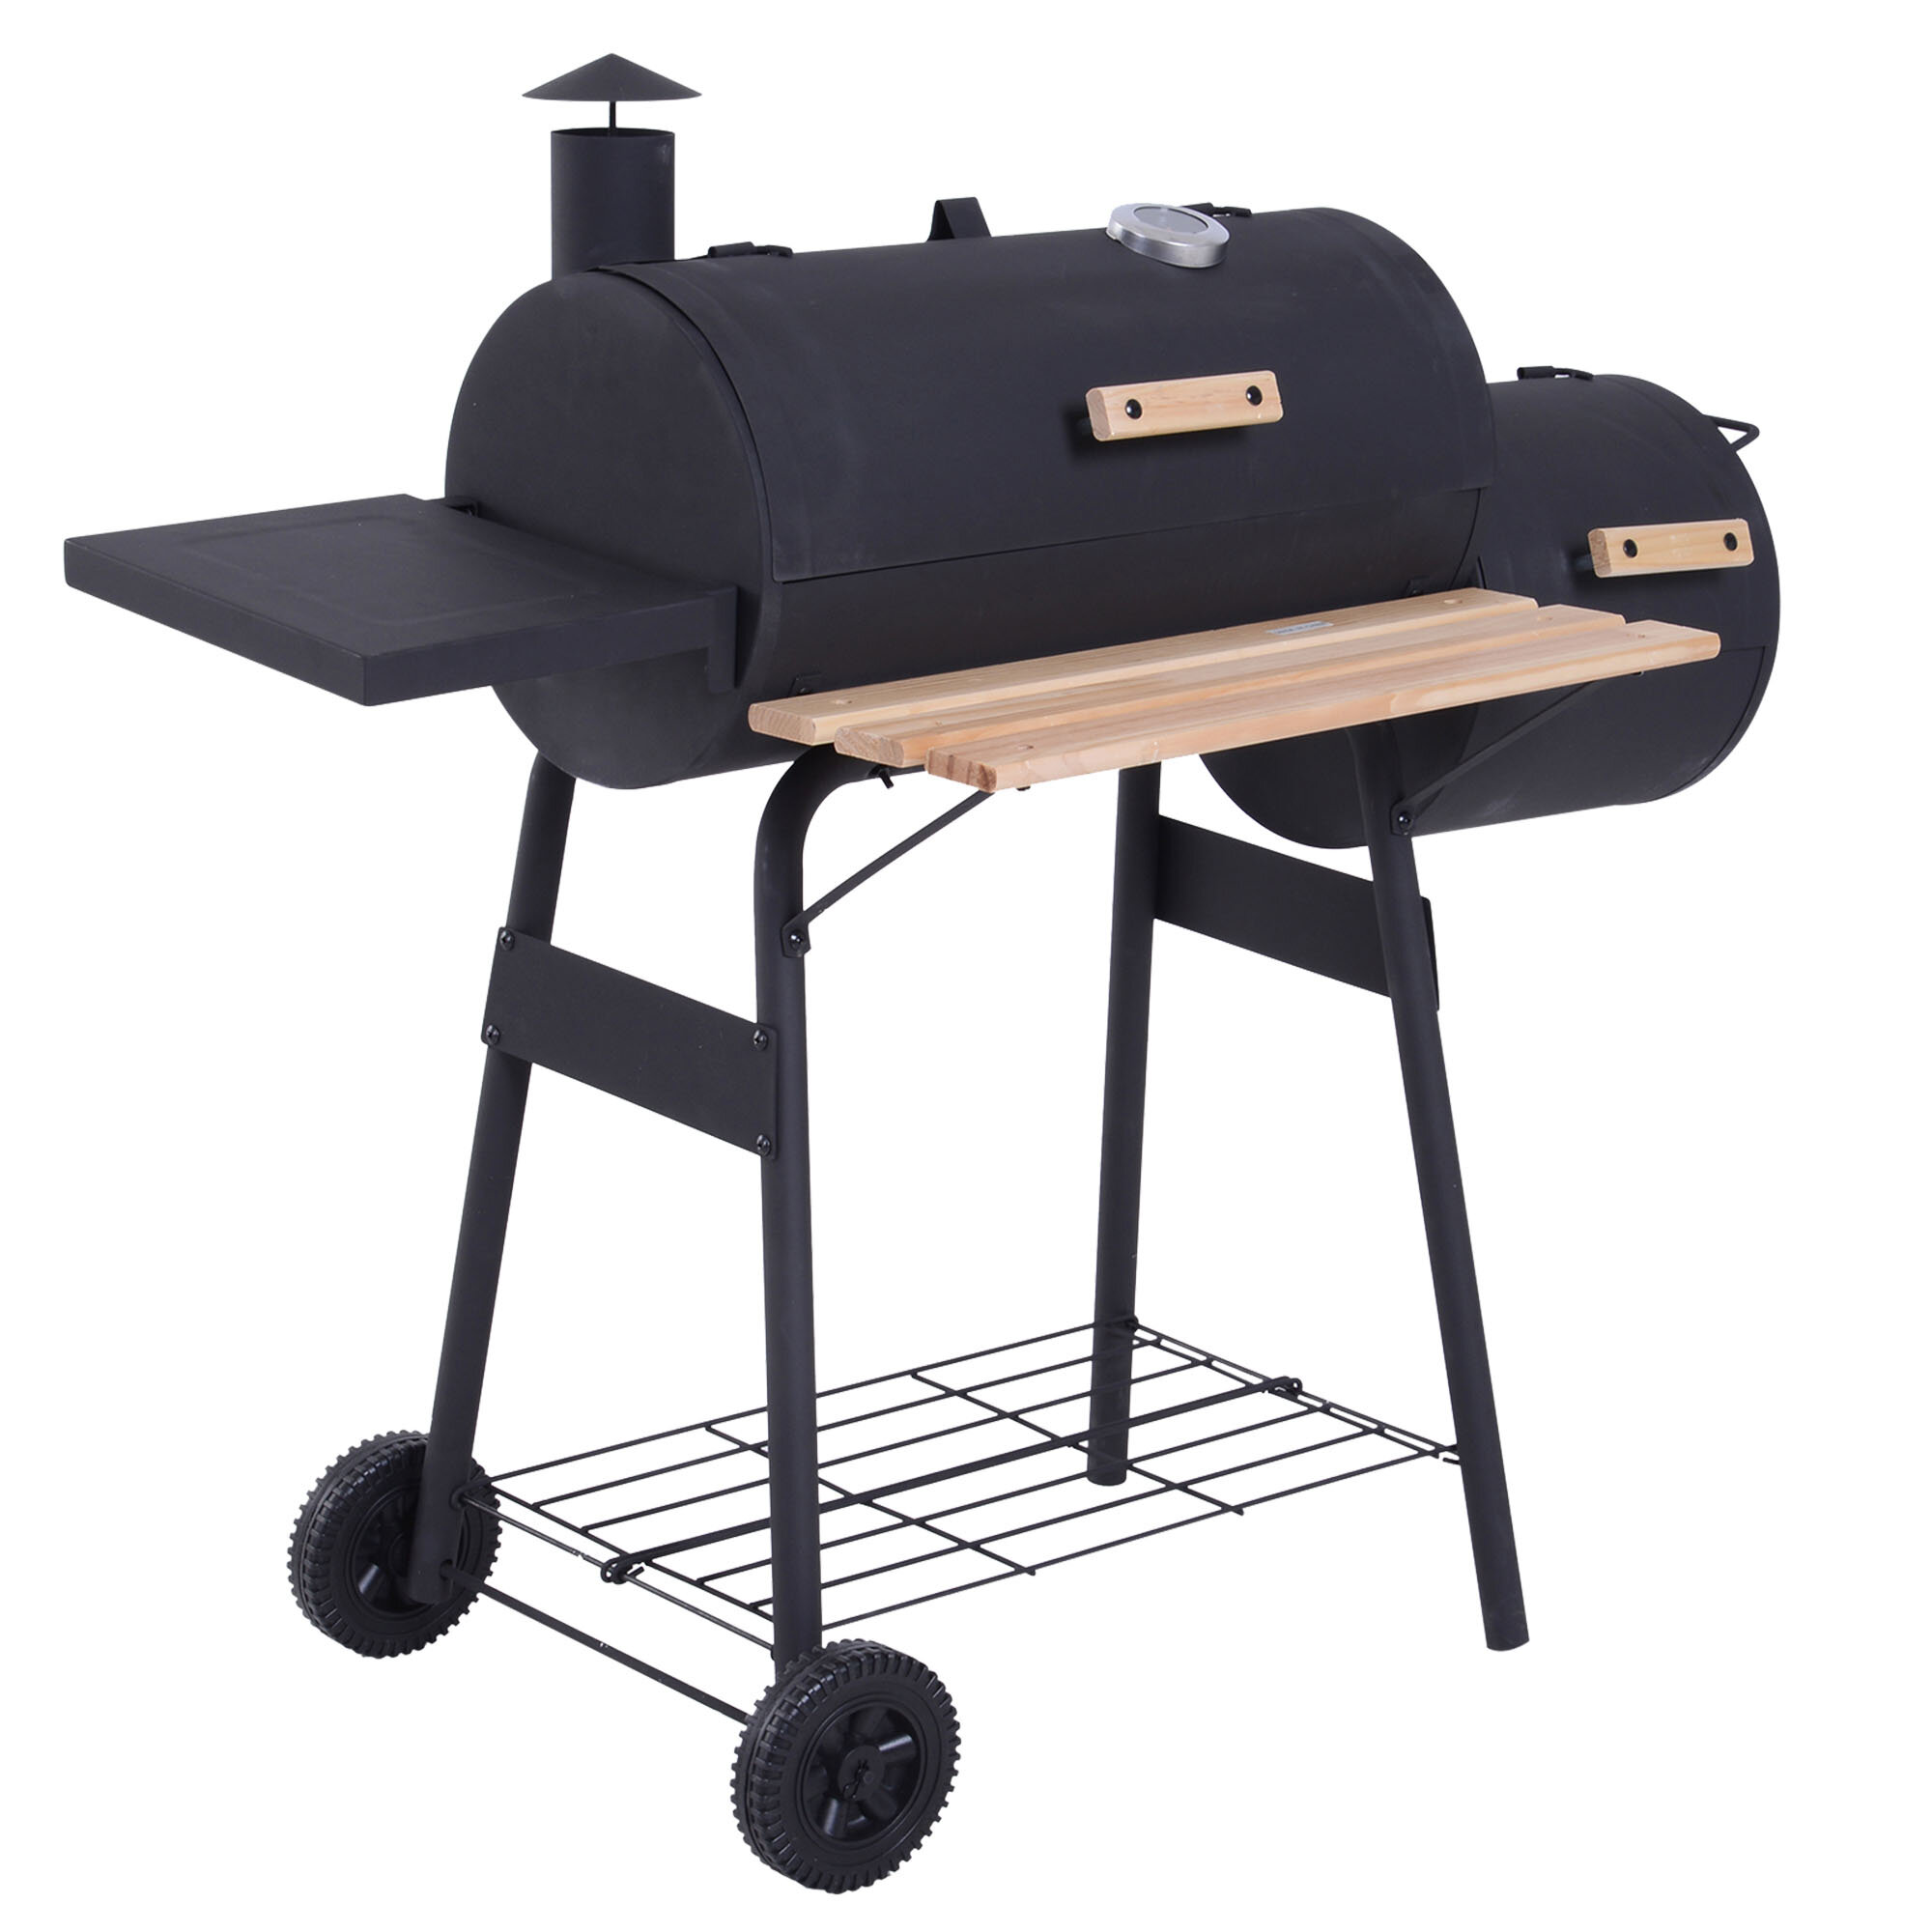 Outsunny 11.75'' W Charcoal Grill & Reviews